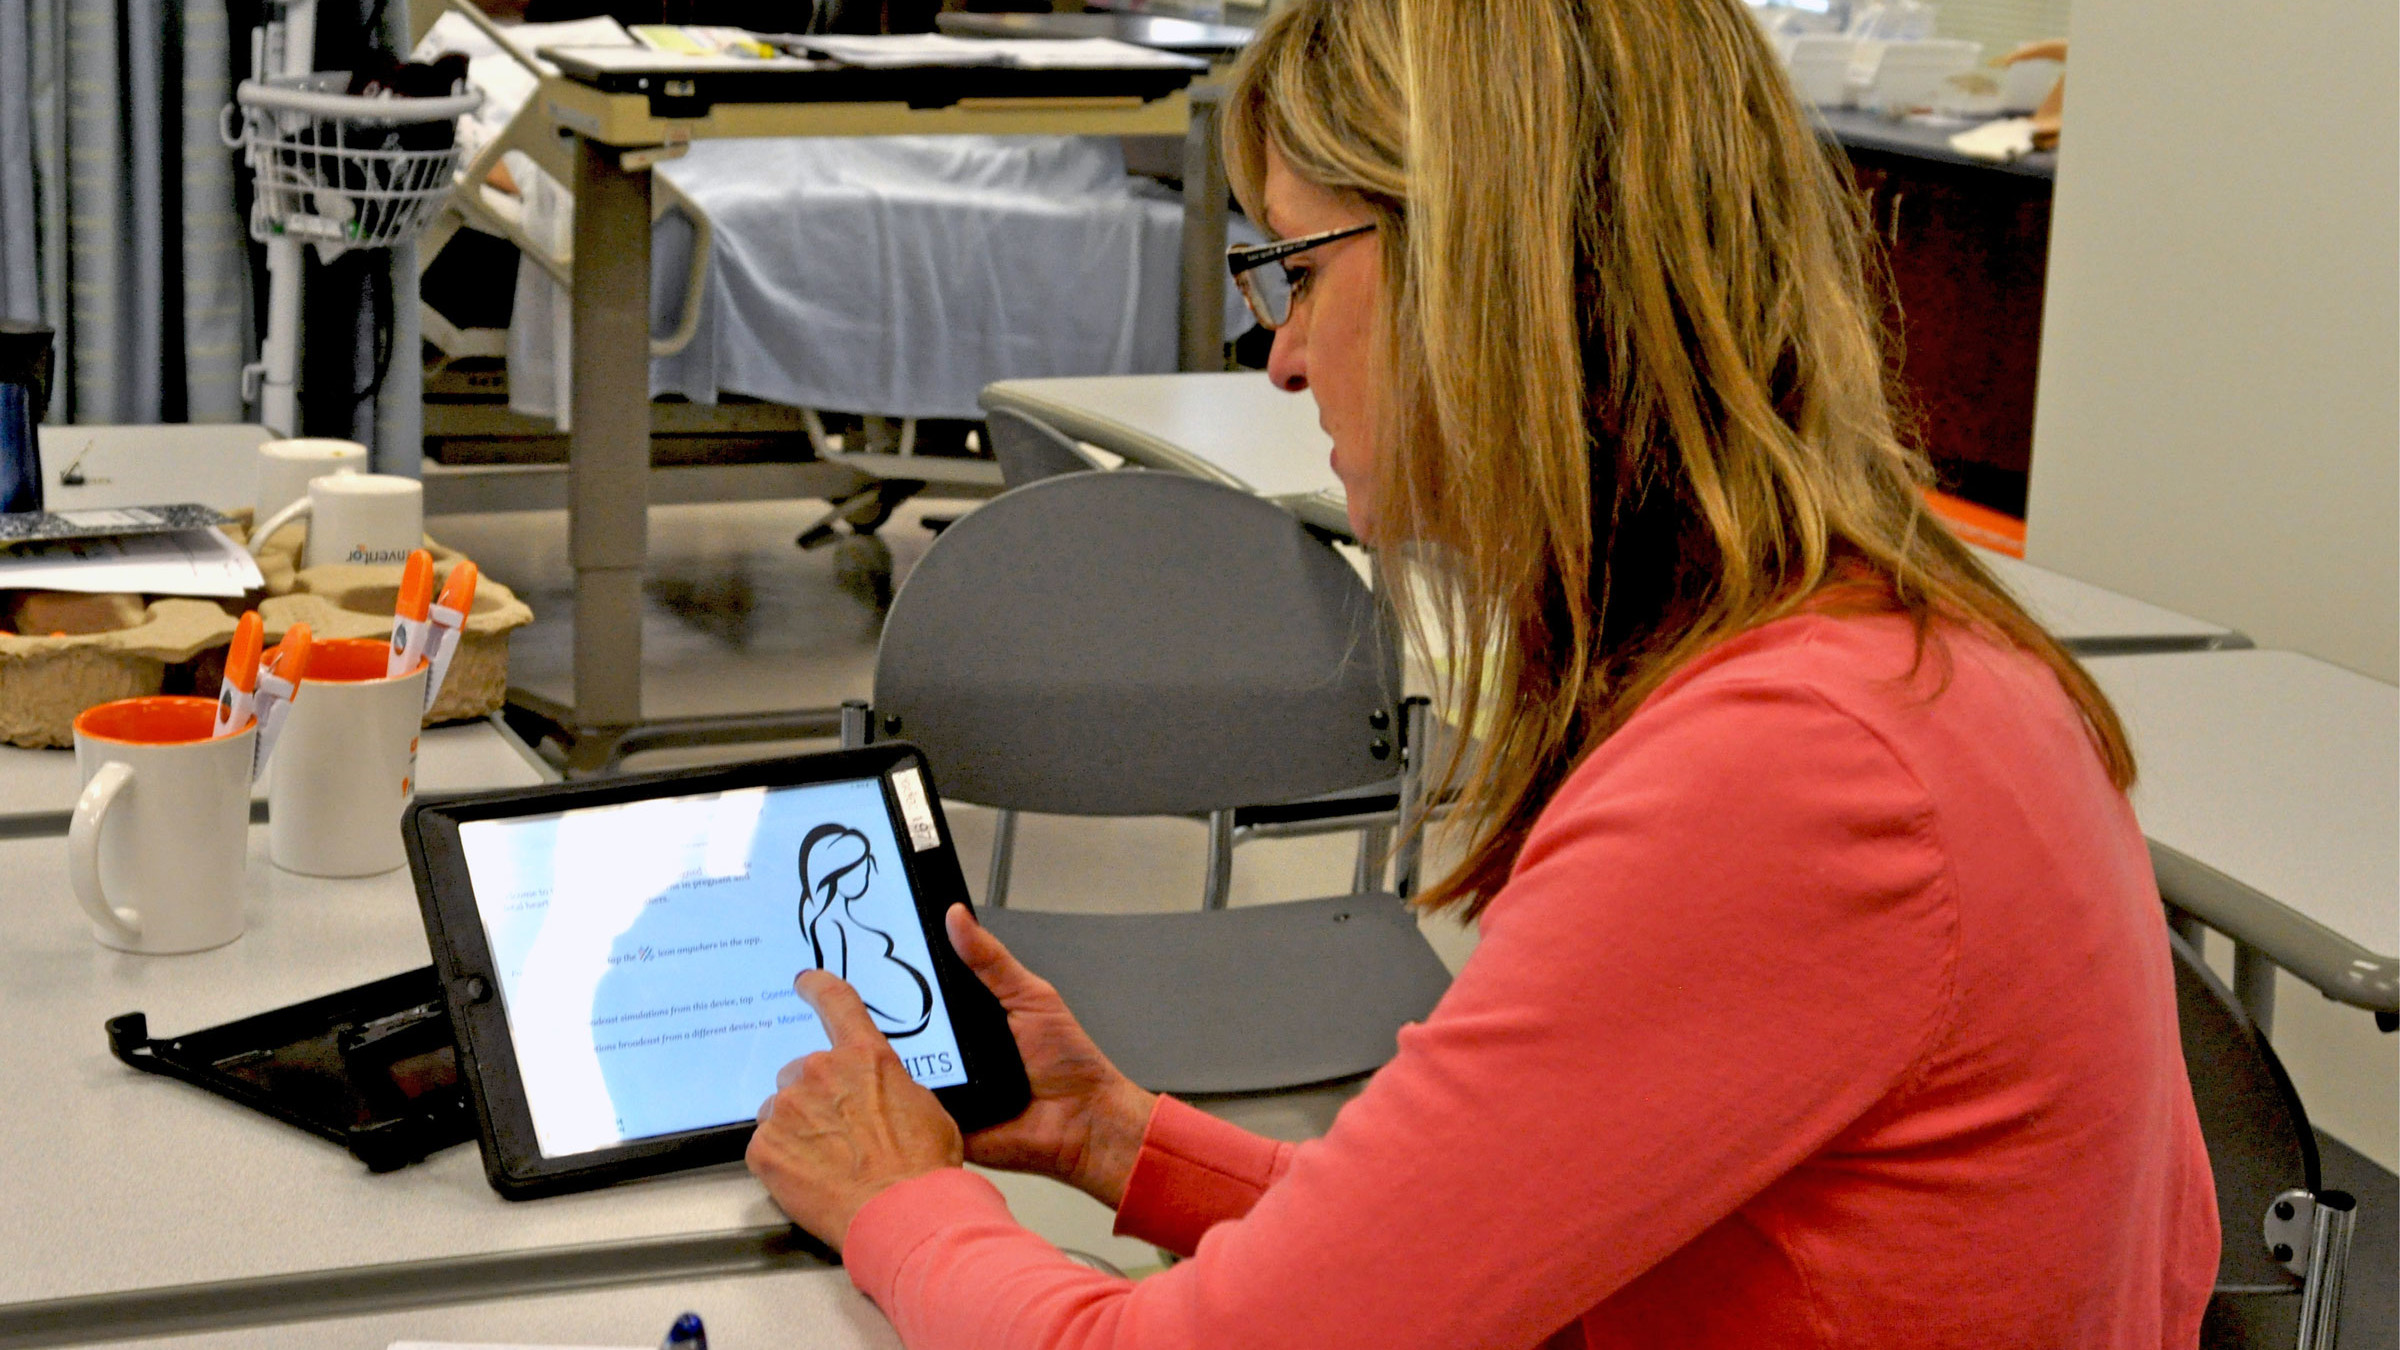 Susan Fancher gestures on a touchscreen tablet in a hospital room